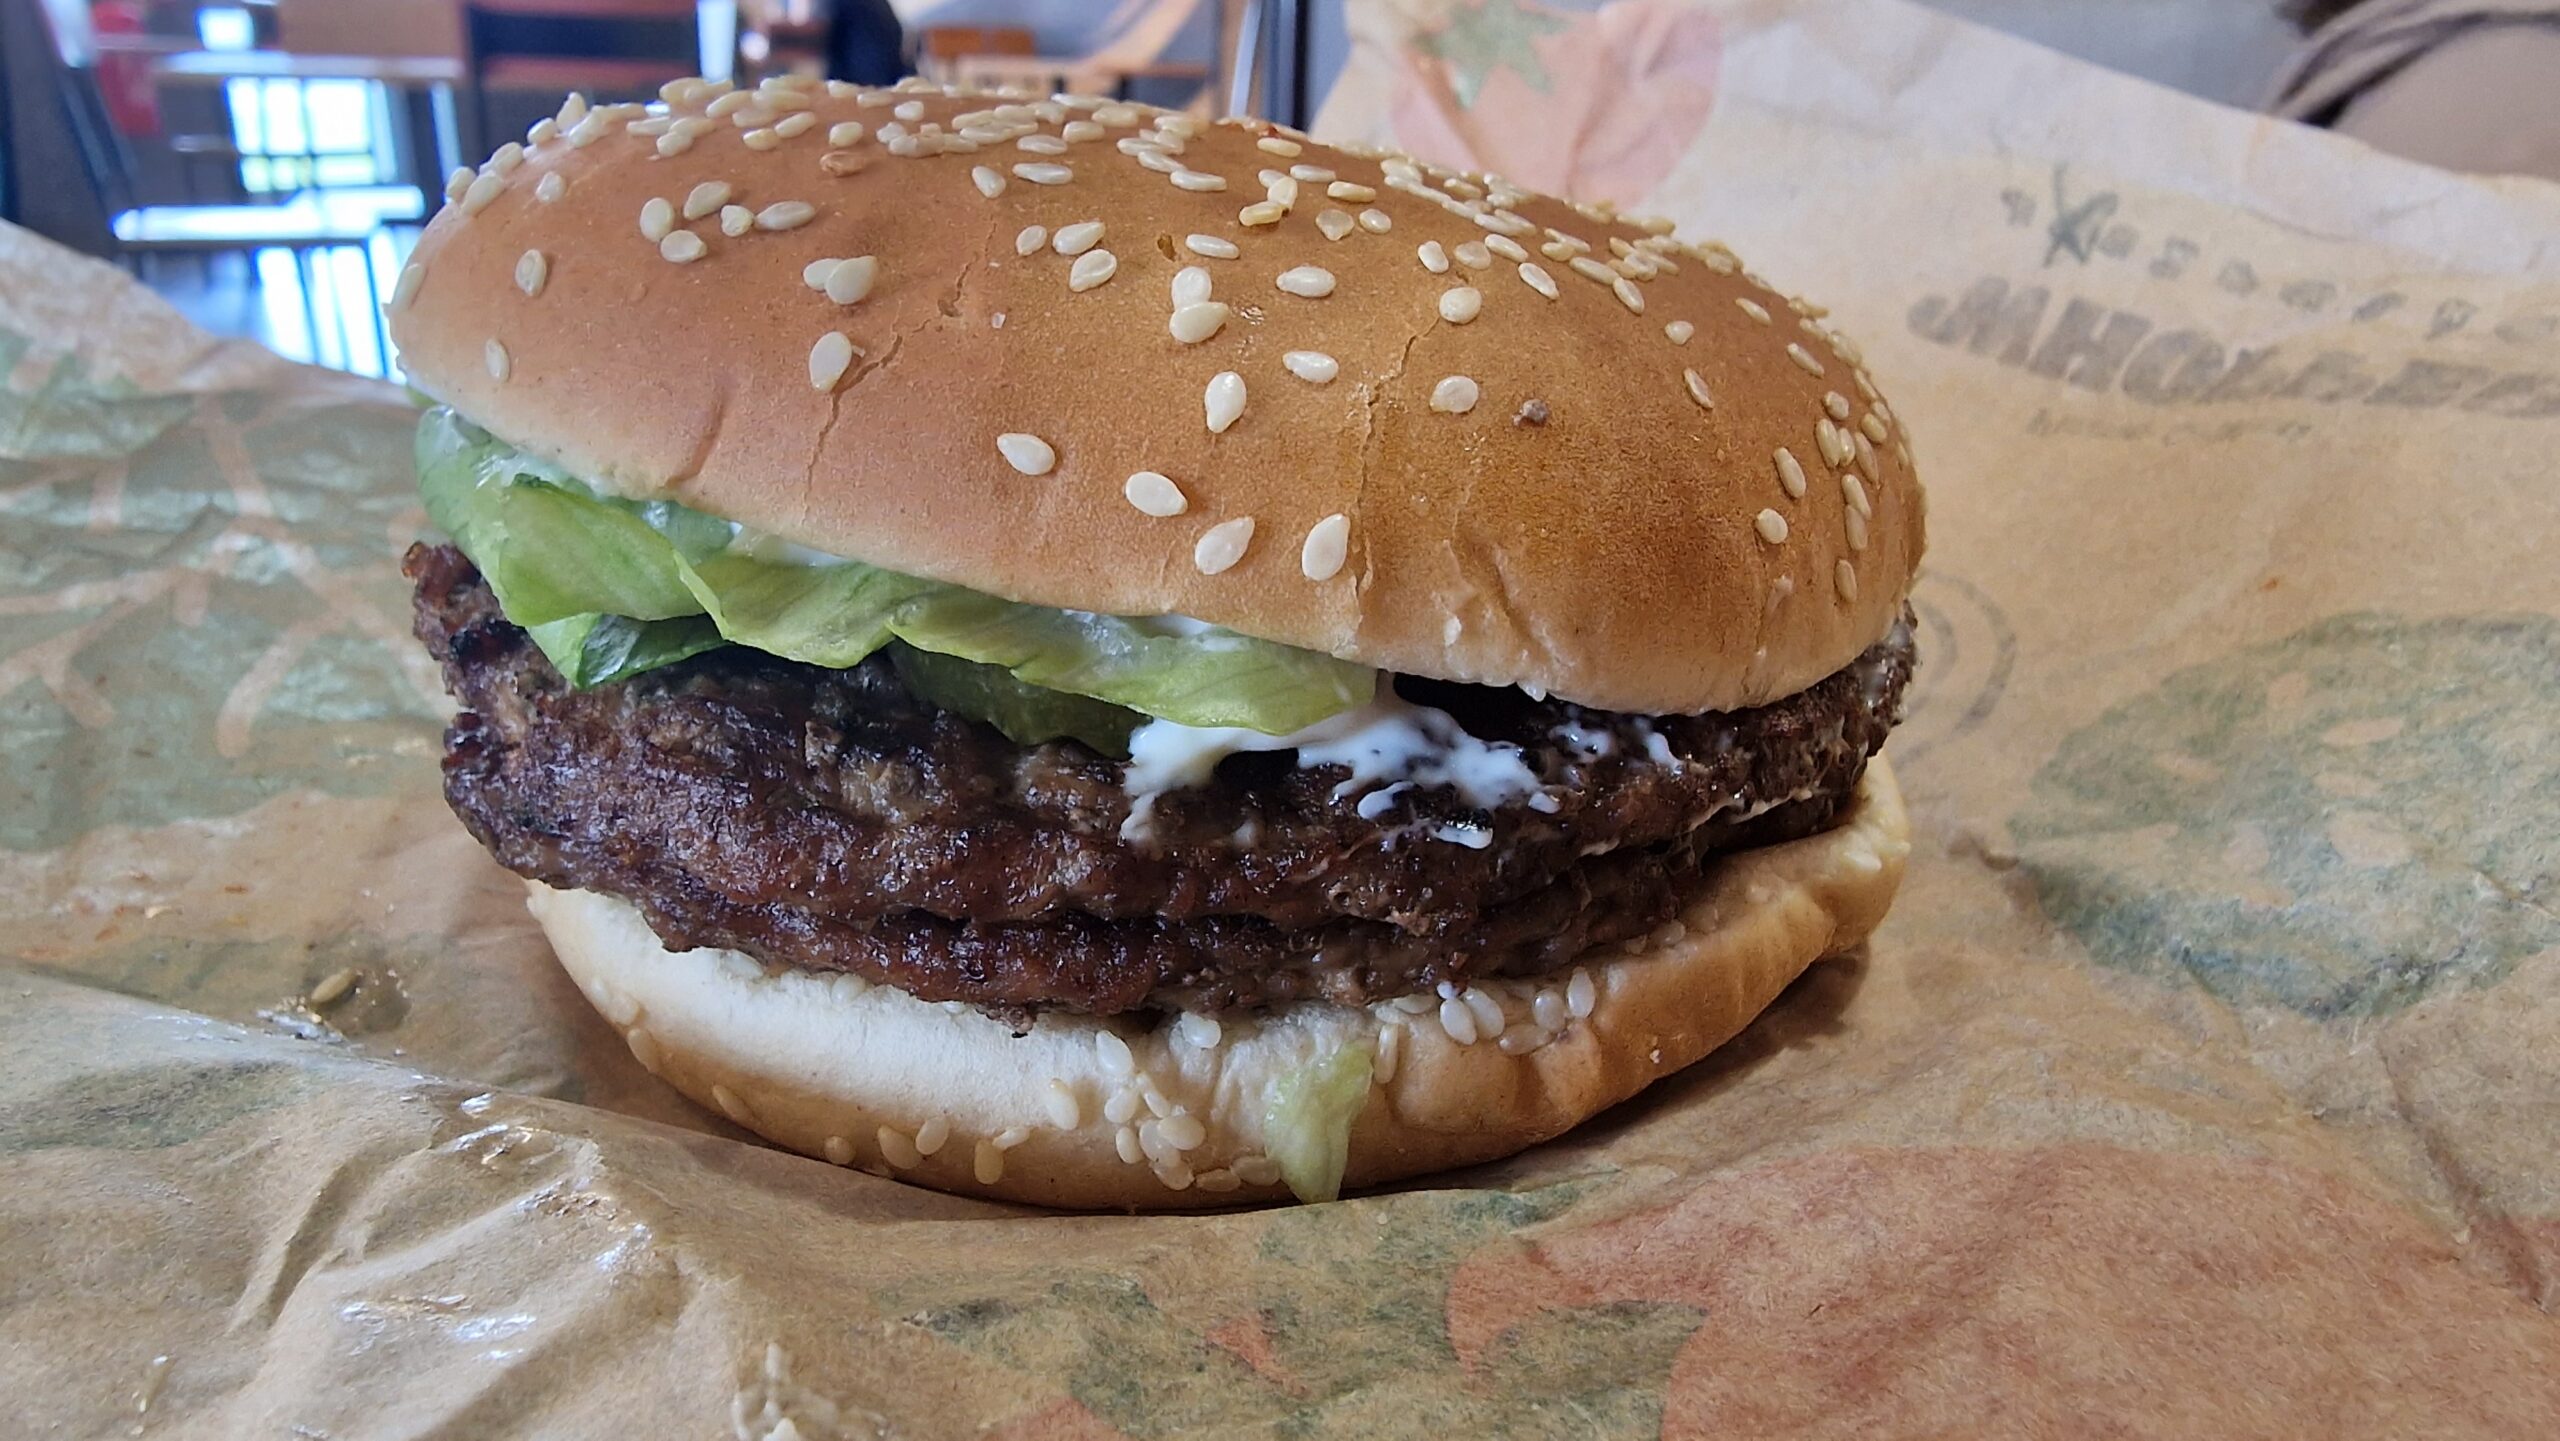 We reviewed and Burger King's Double Whopper, this is what we Thought!